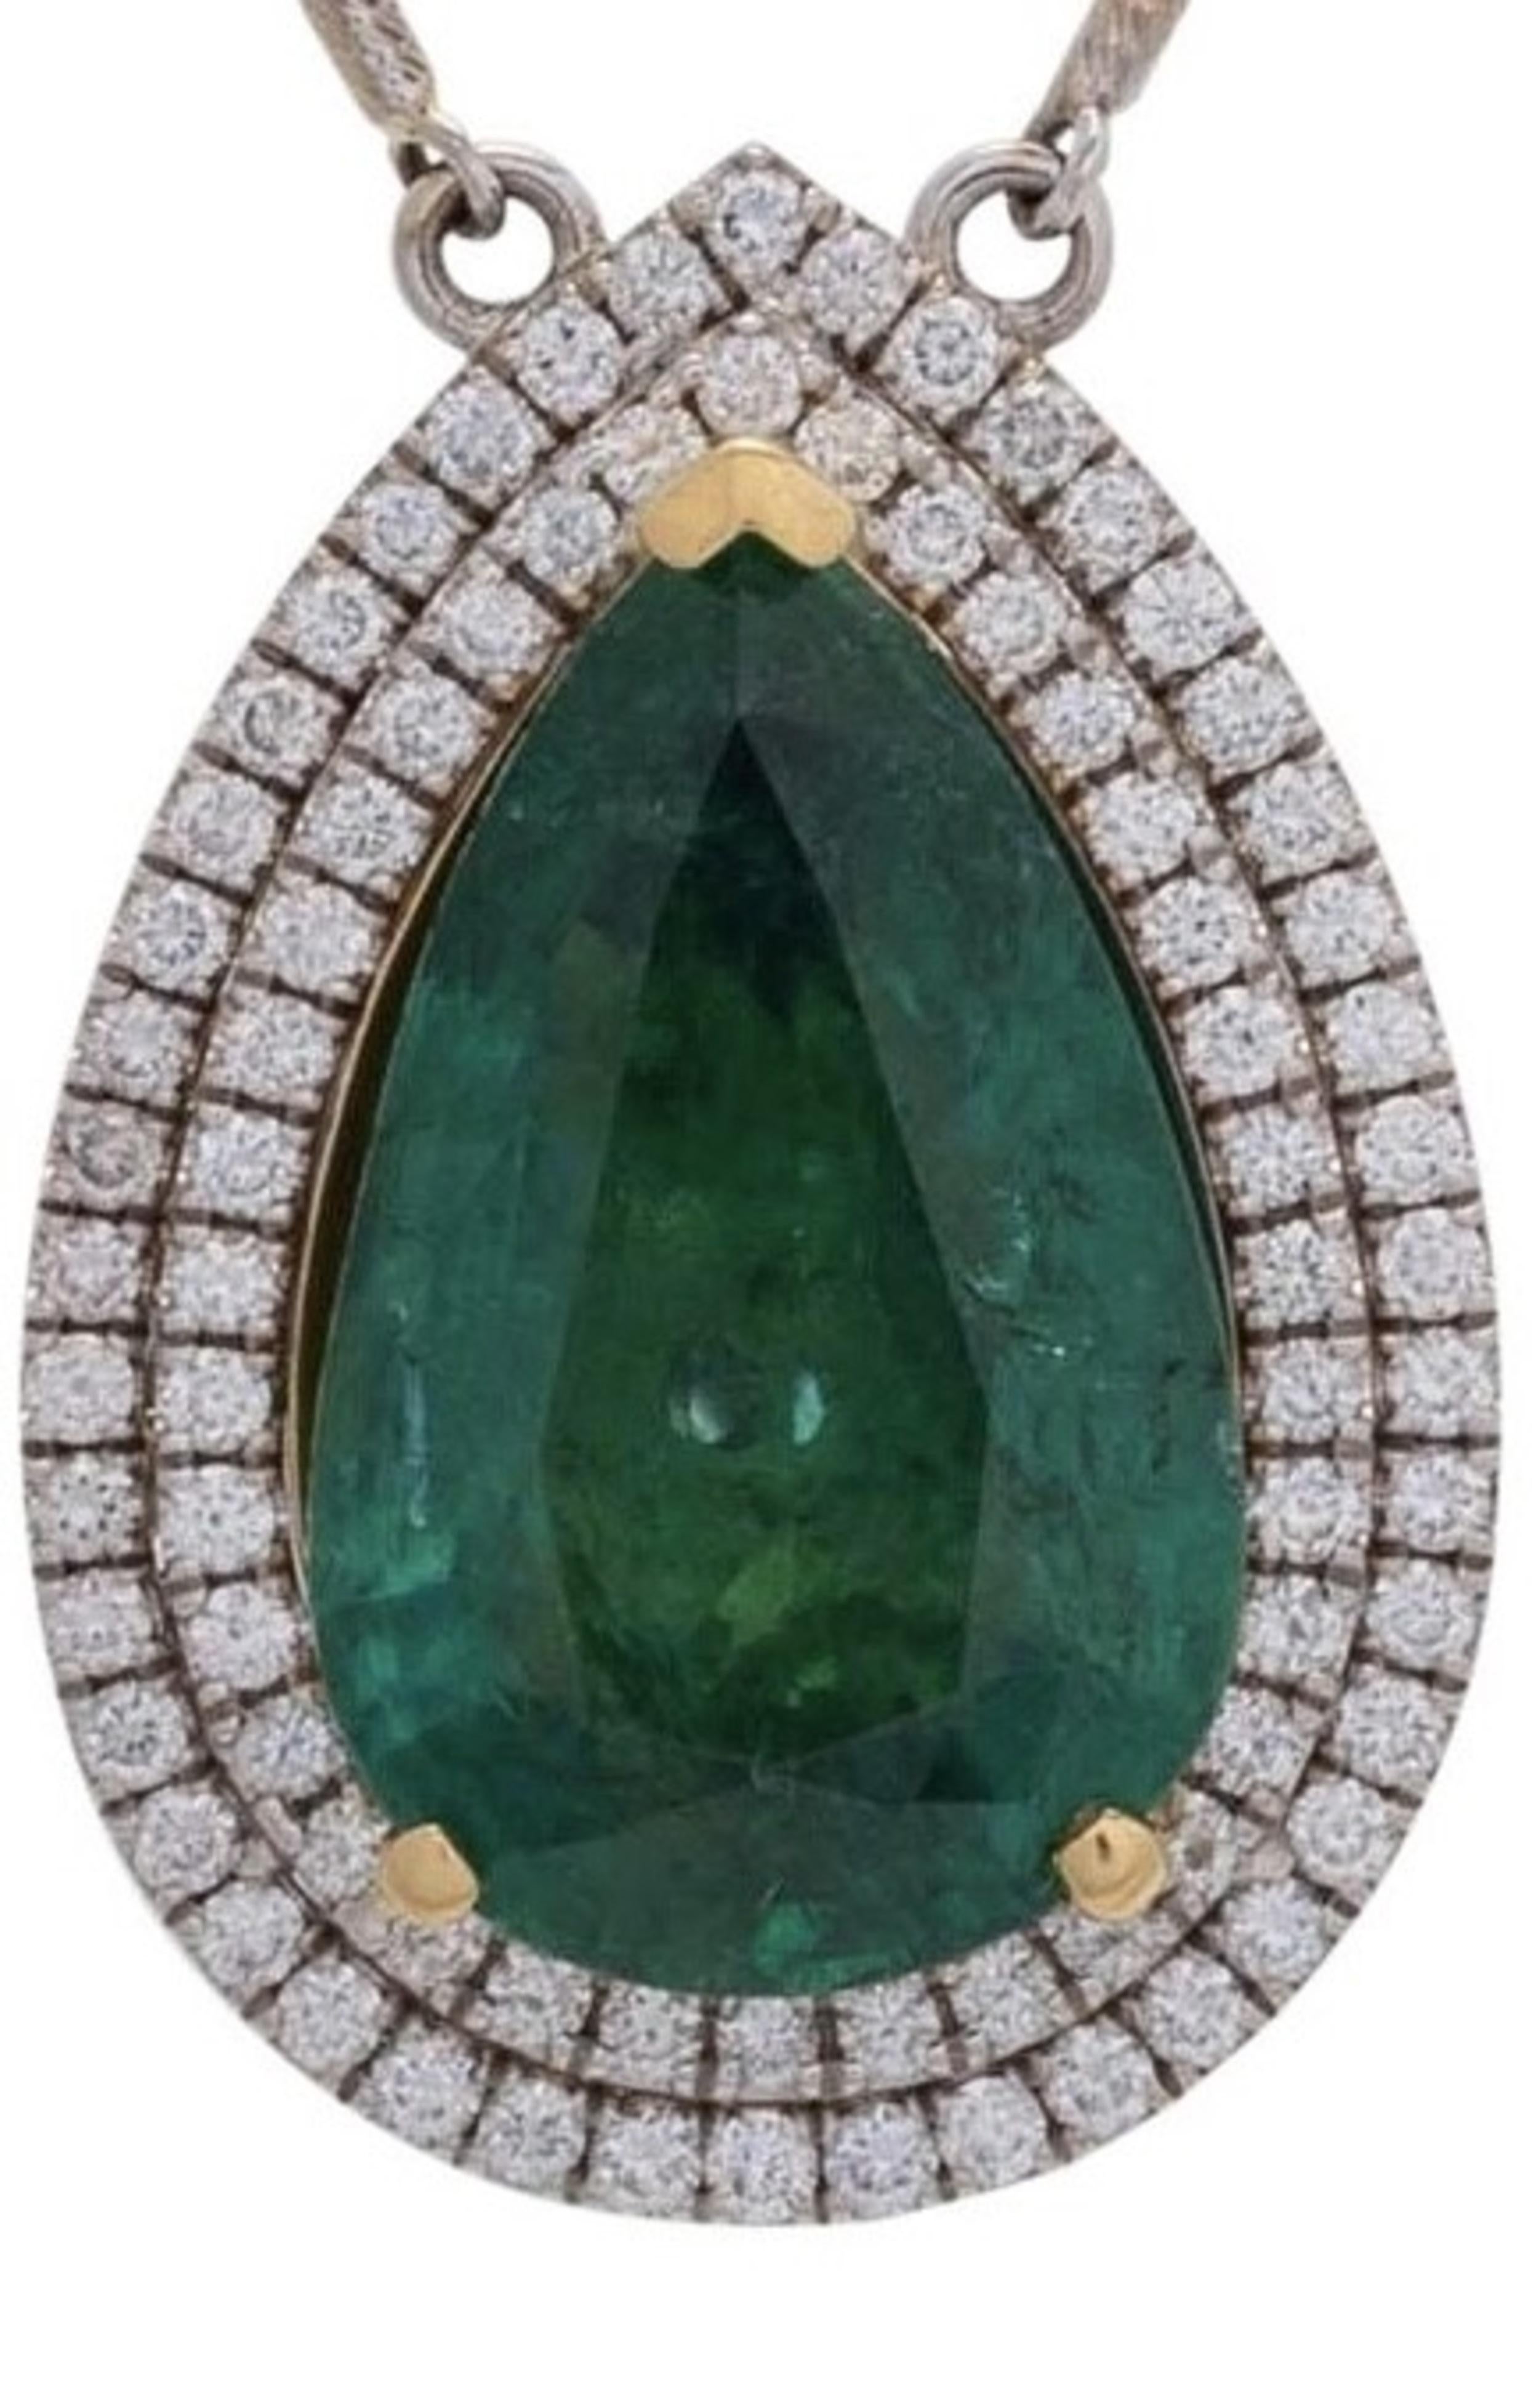 Very Fine Emerald and Diamond Pendant Necklace , 
The pendant set with a pear-shaped emerald weighing 9.20 carats, the double surround gallery set with brilliant-cut diamonds
weighing approximately 1.05 carats, 
to a necklace of belcher chain